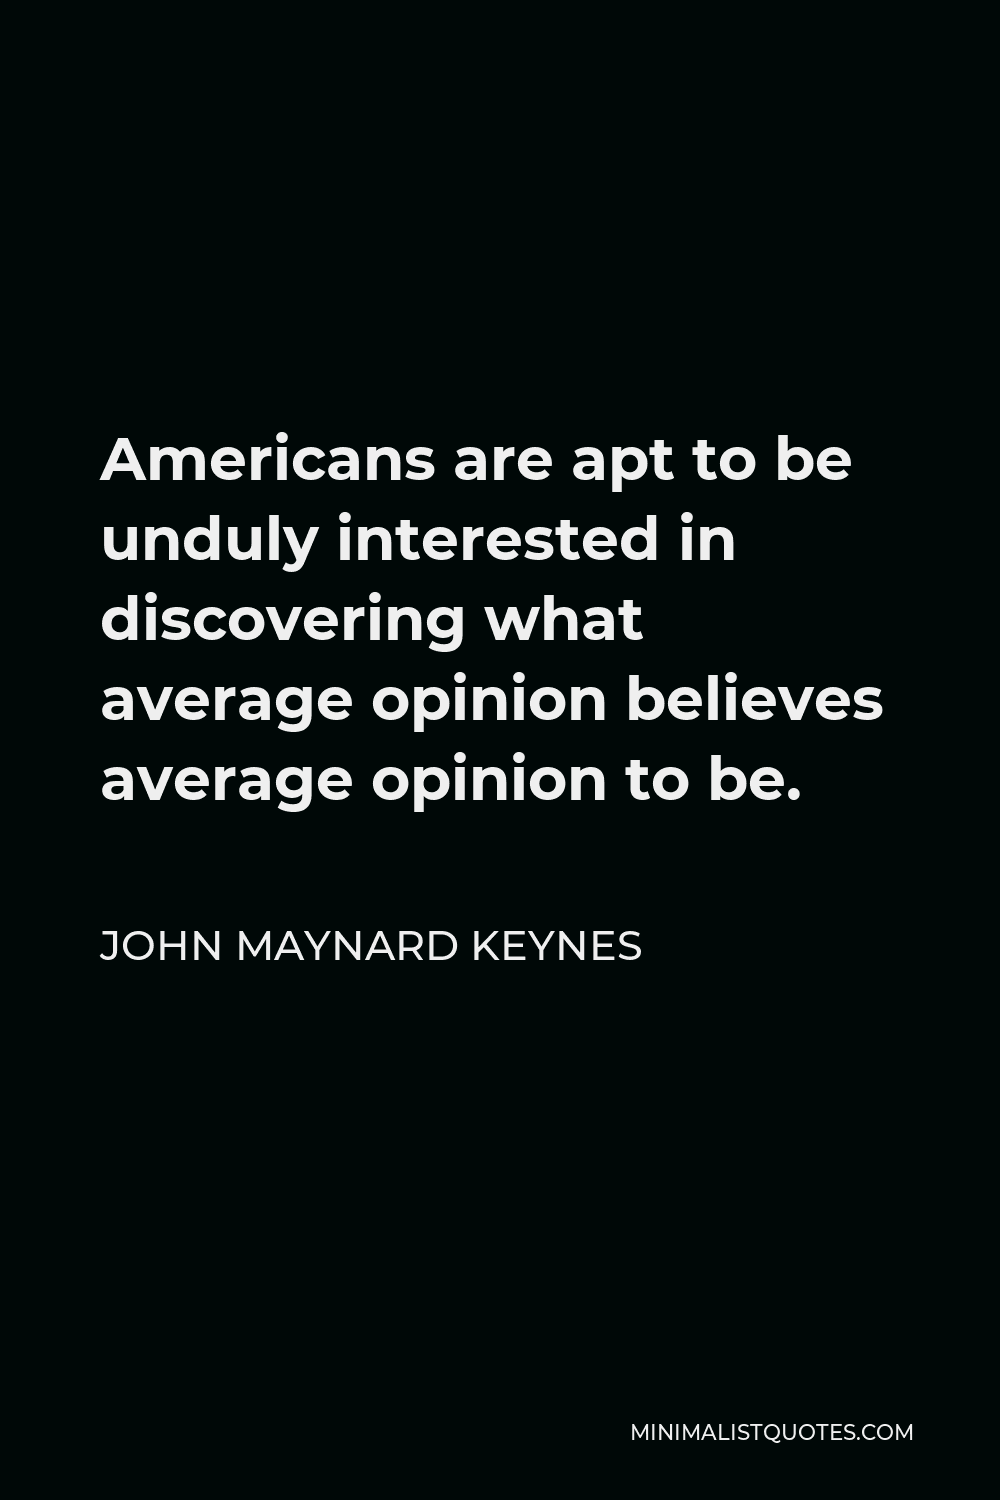 John Maynard Keynes Quote - Americans are apt to be unduly interested in discovering what average opinion believes average opinion to be.